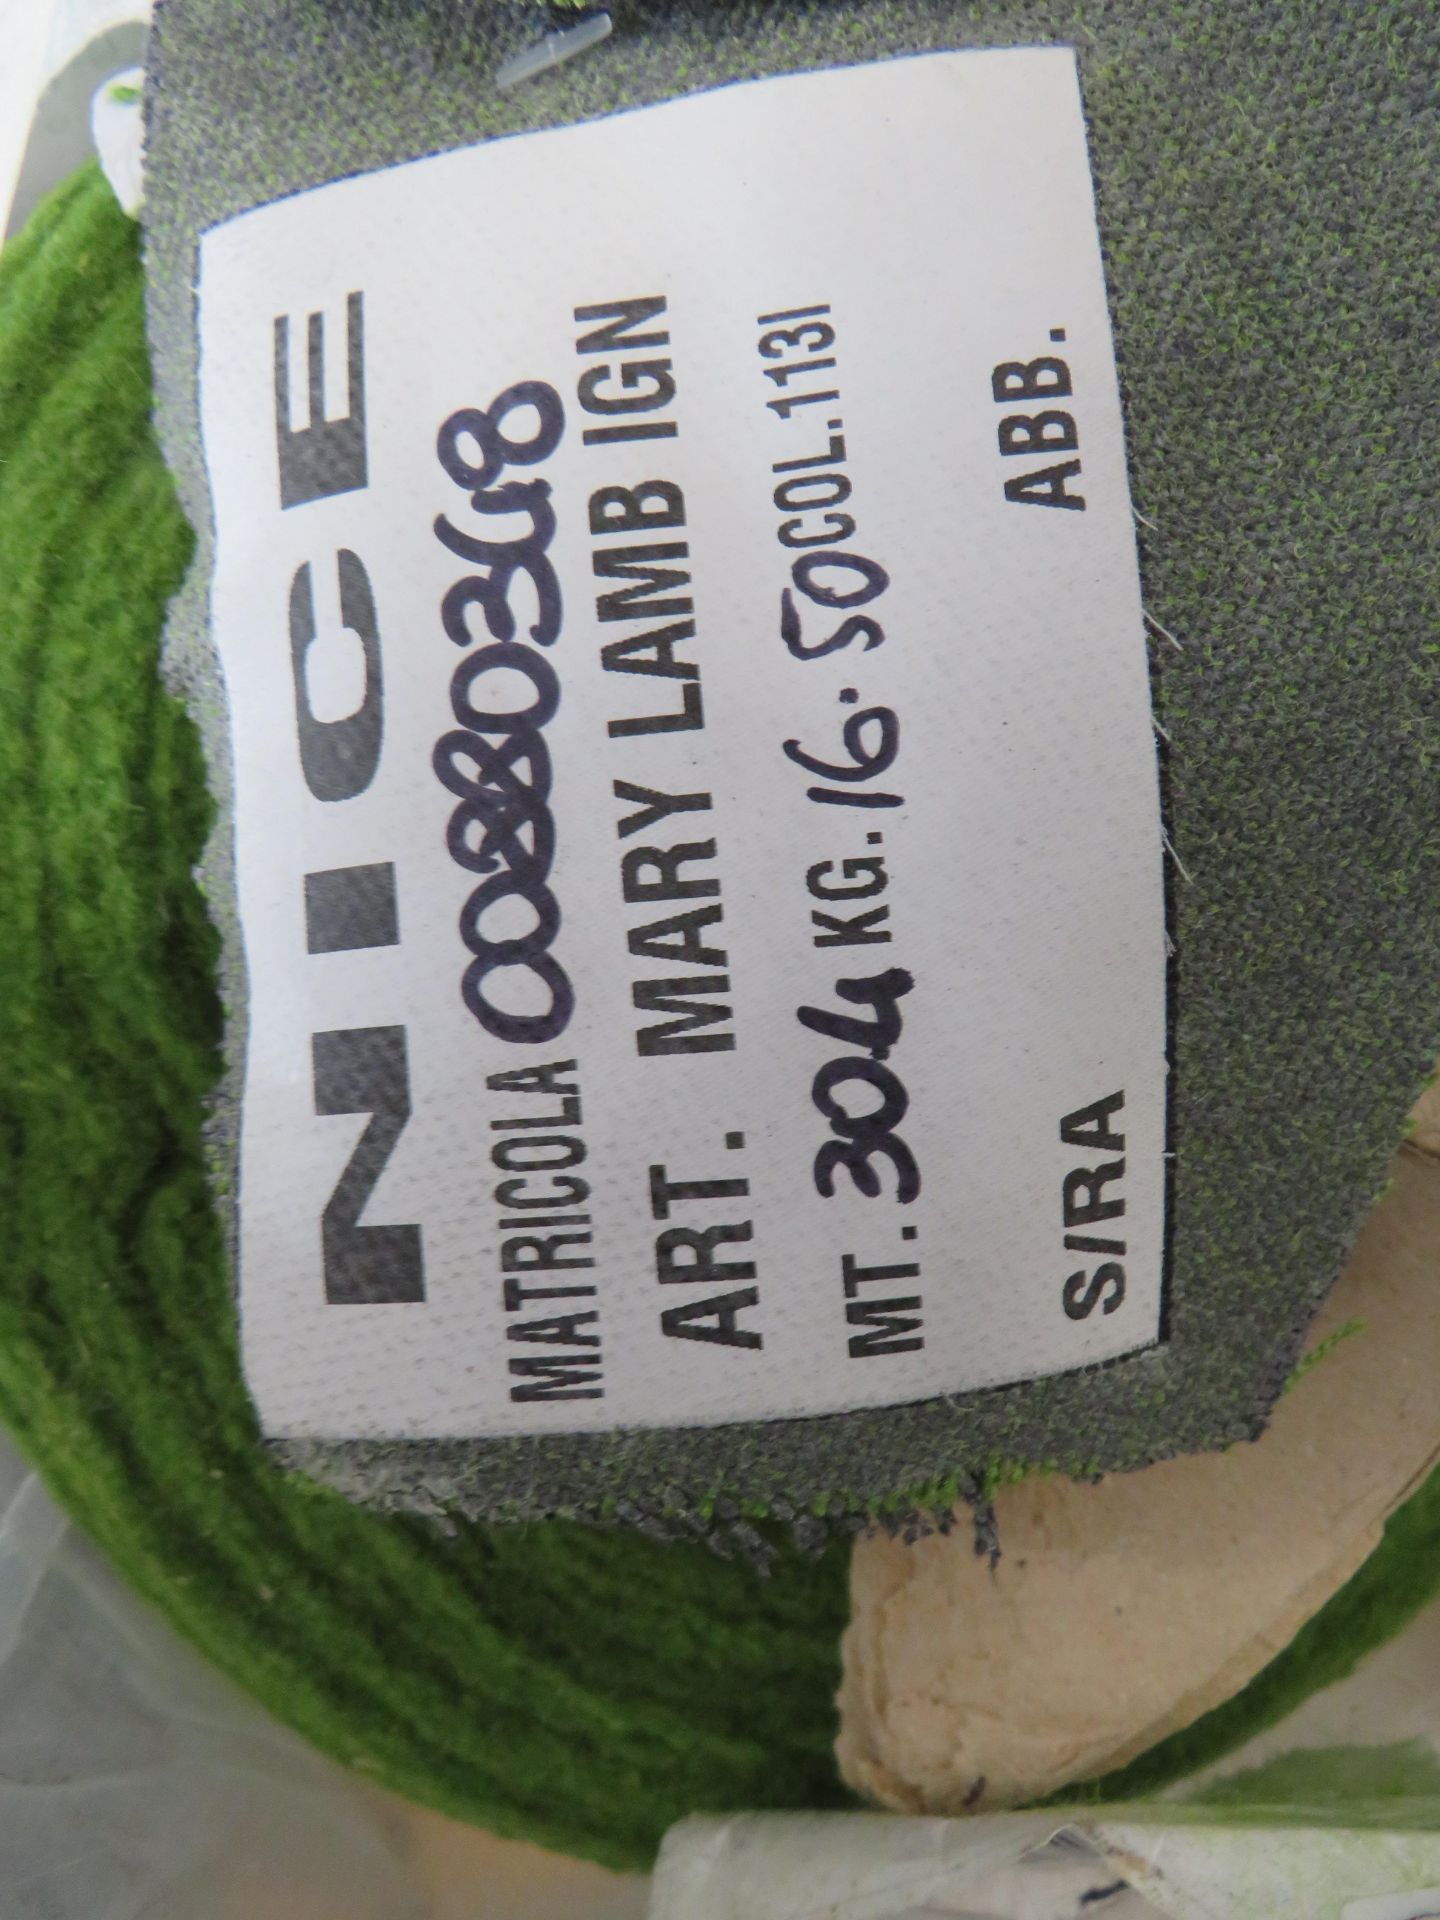 Roll of Mary Lamb Rosmarino green fabric, unknown length as sold in John Lewis - Image 3 of 3